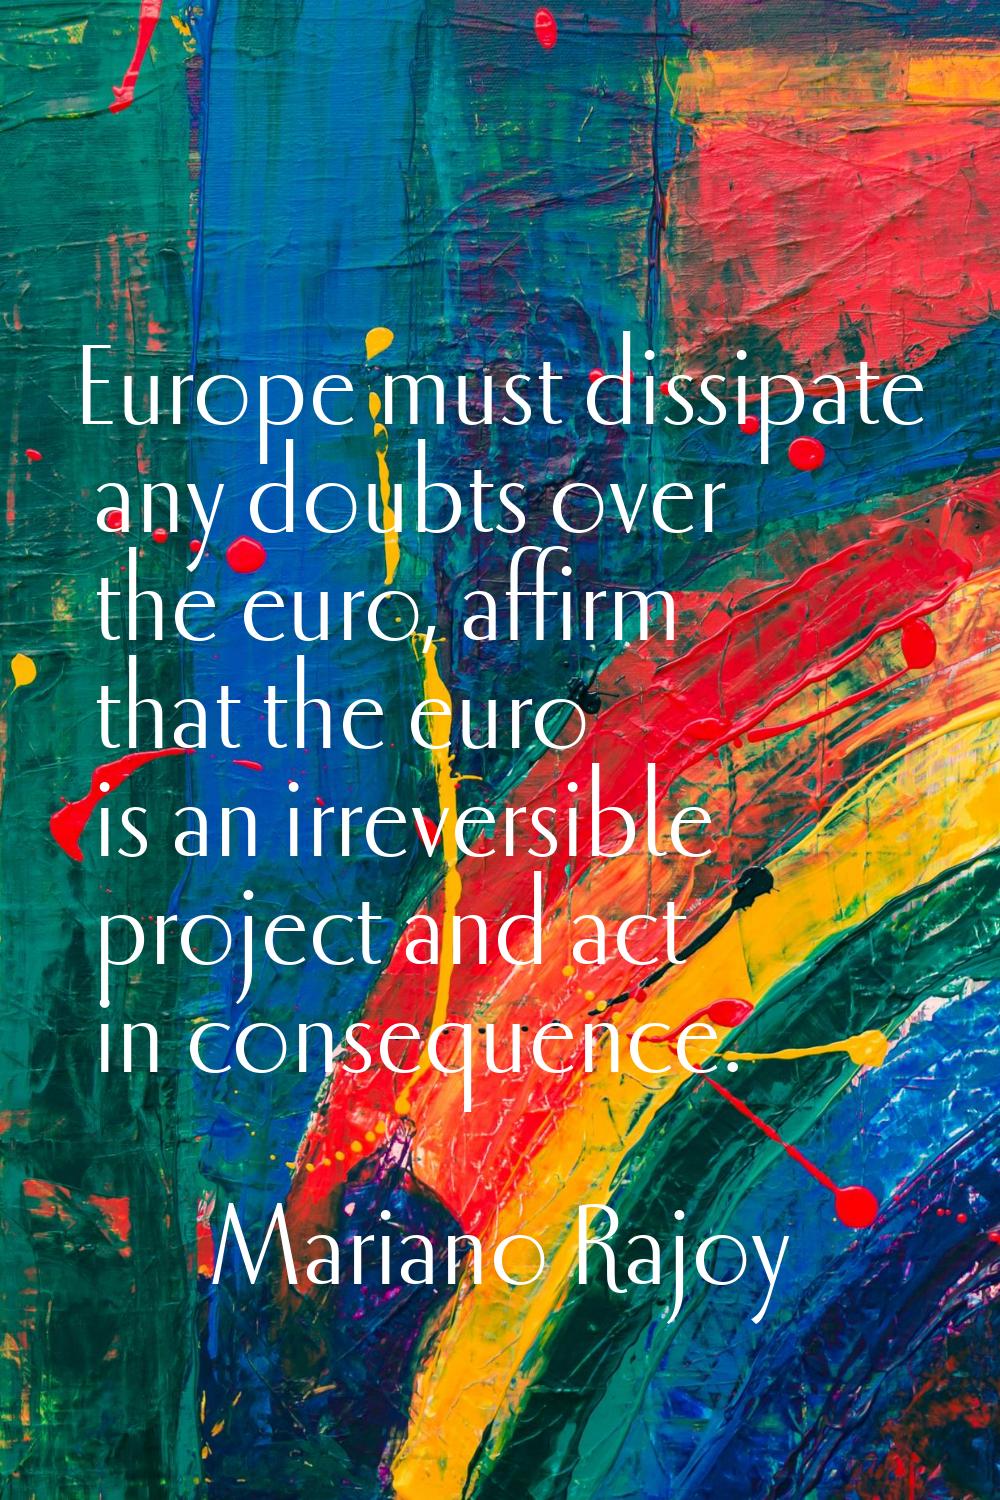 Europe must dissipate any doubts over the euro, affirm that the euro is an irreversible project and